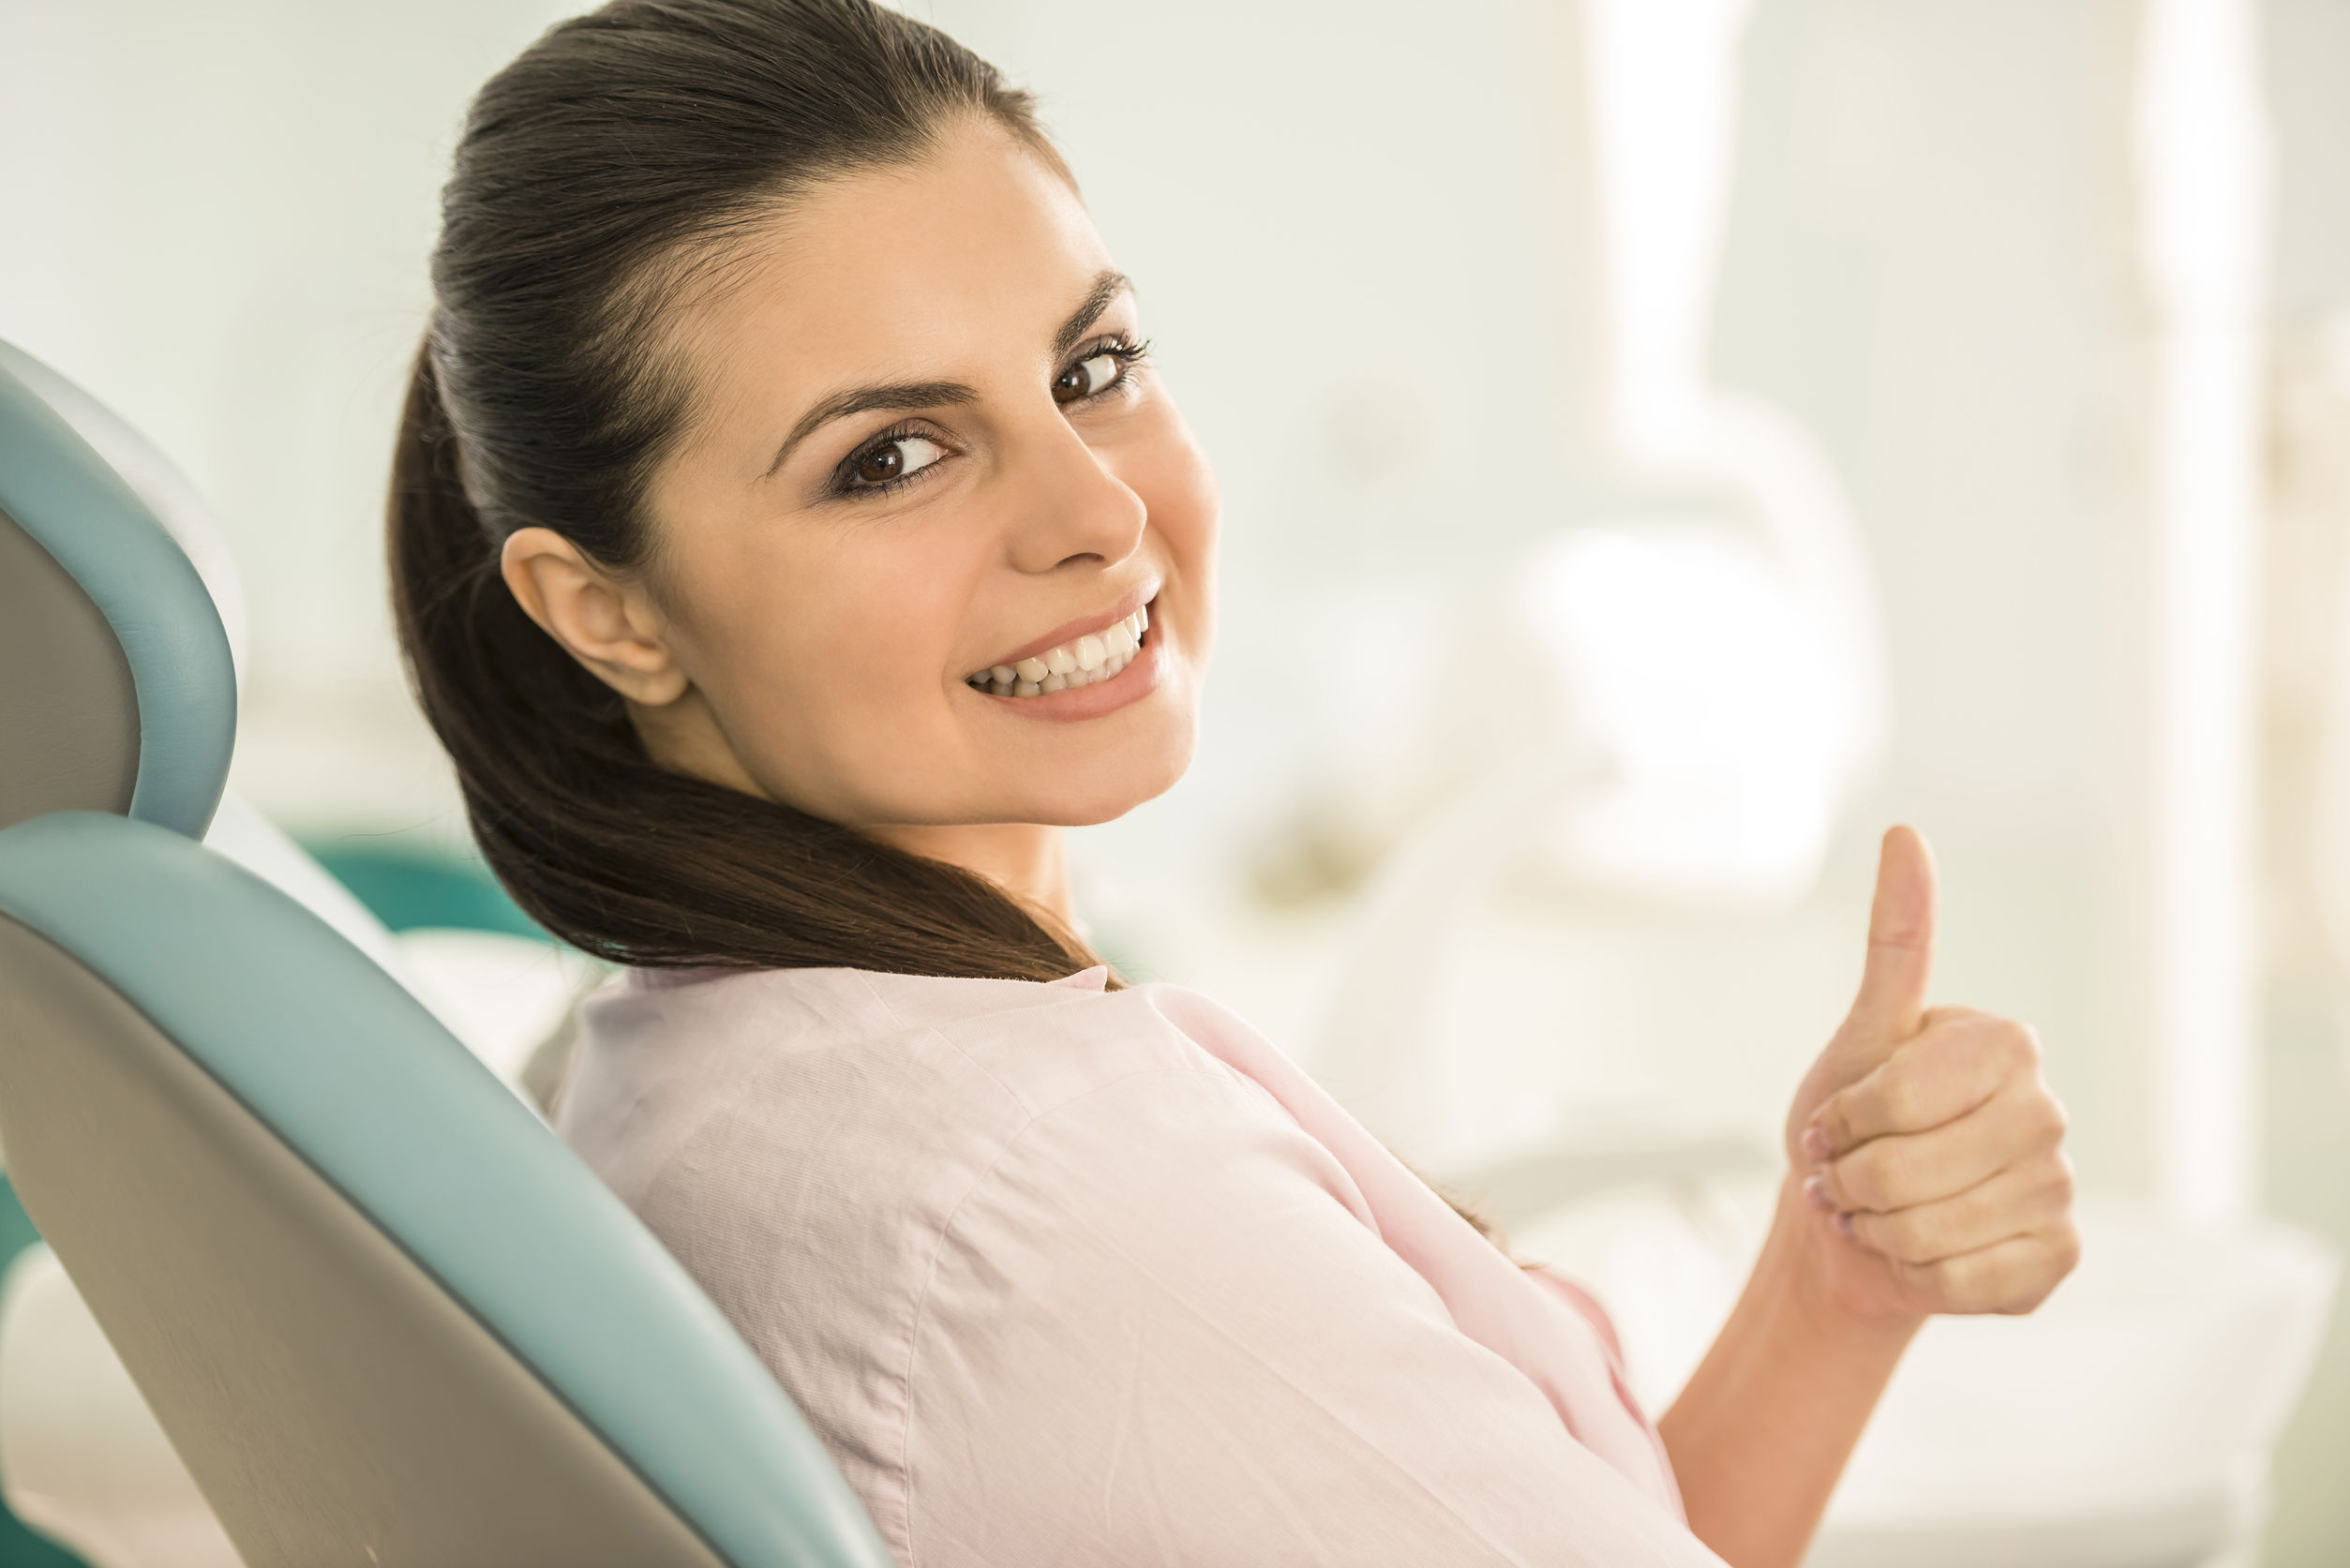 Where can I find an Elk Grove root canal dentist?